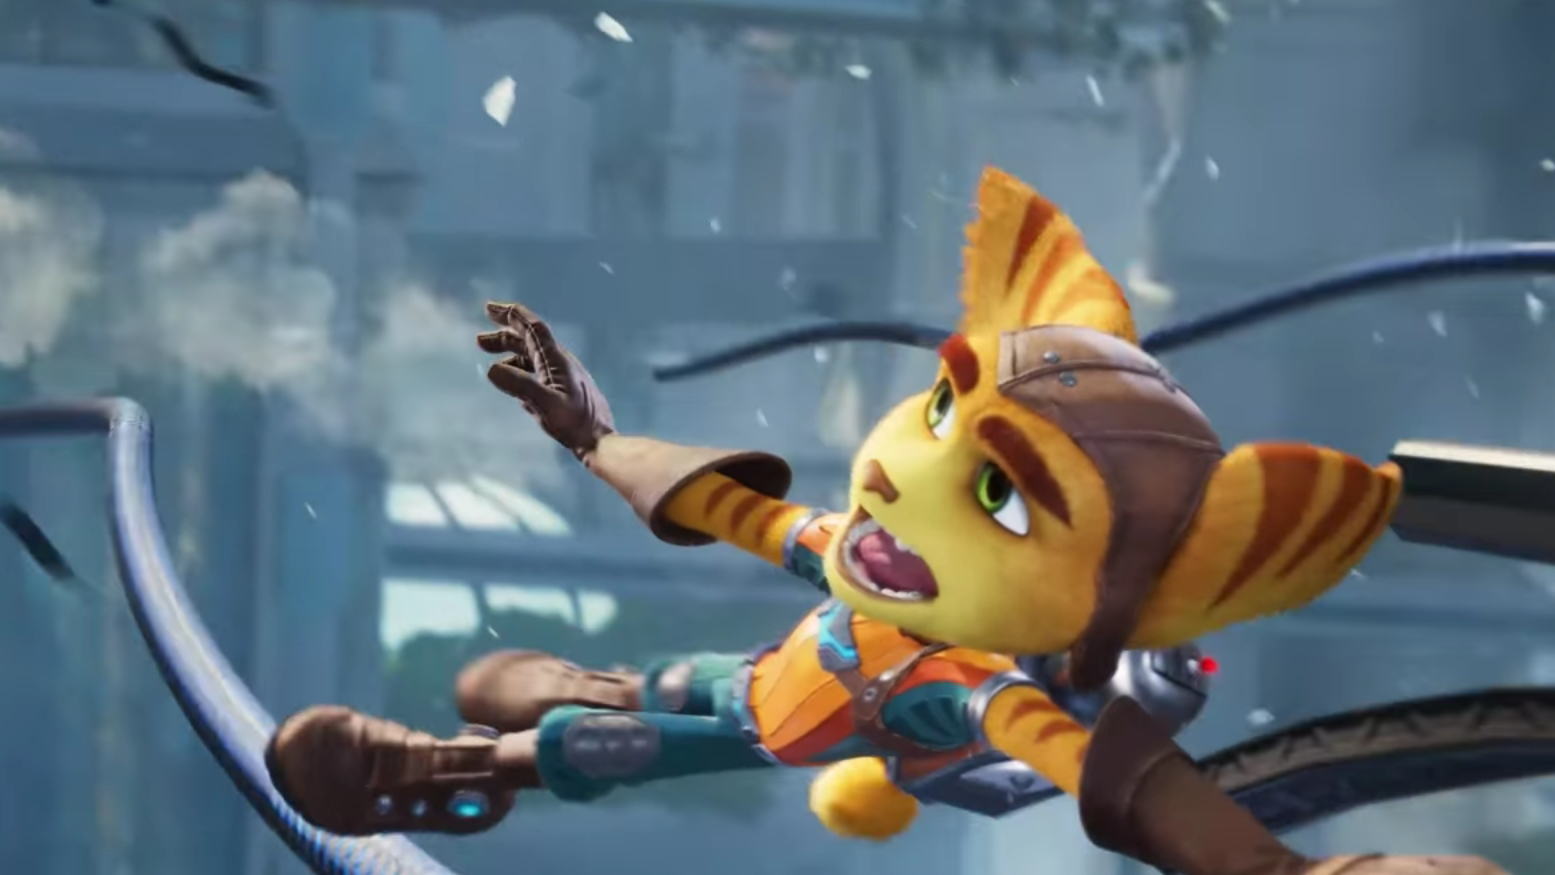  AMD's most powerful graphics card crashes hard in Ratchet and Clank with ray tracing enabled 